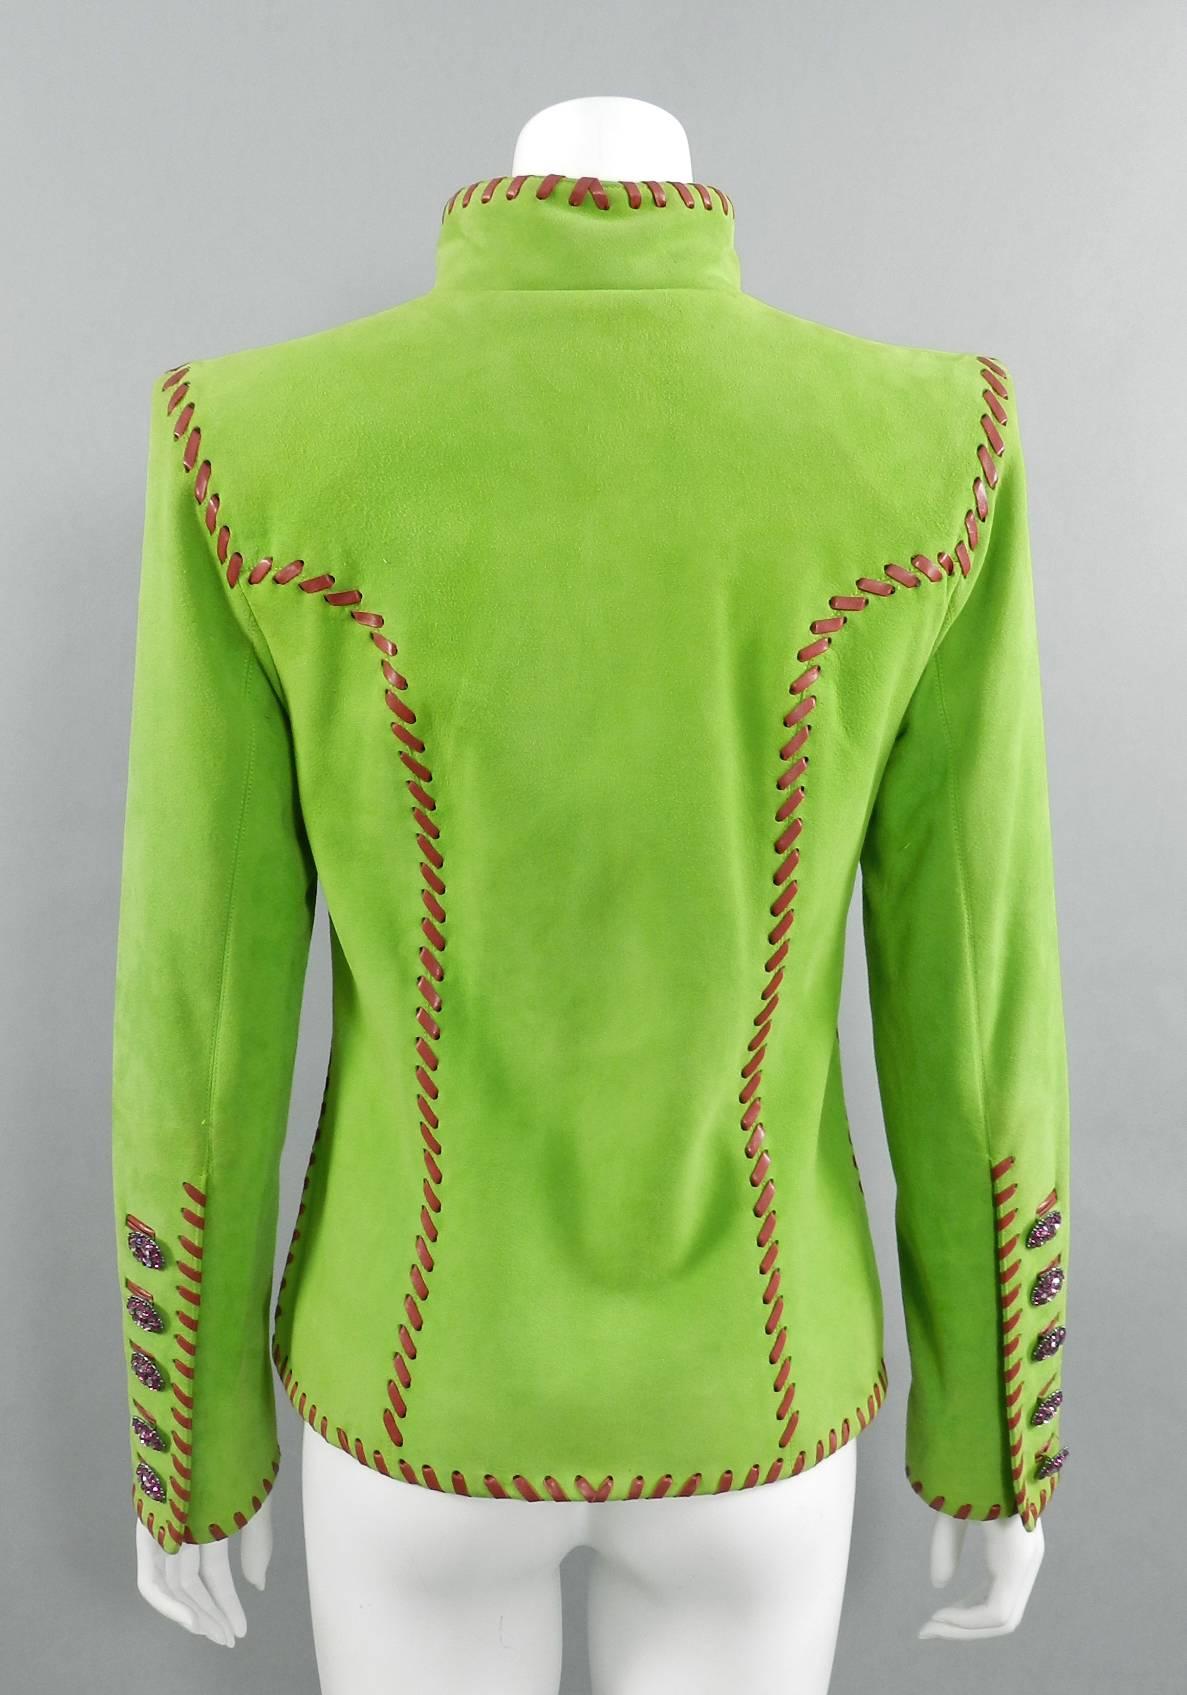 Yves Saint Laurent AW 1999 Haute Couture Lime Green and Fuchsia Suede Jacket In Excellent Condition For Sale In Toronto, ON